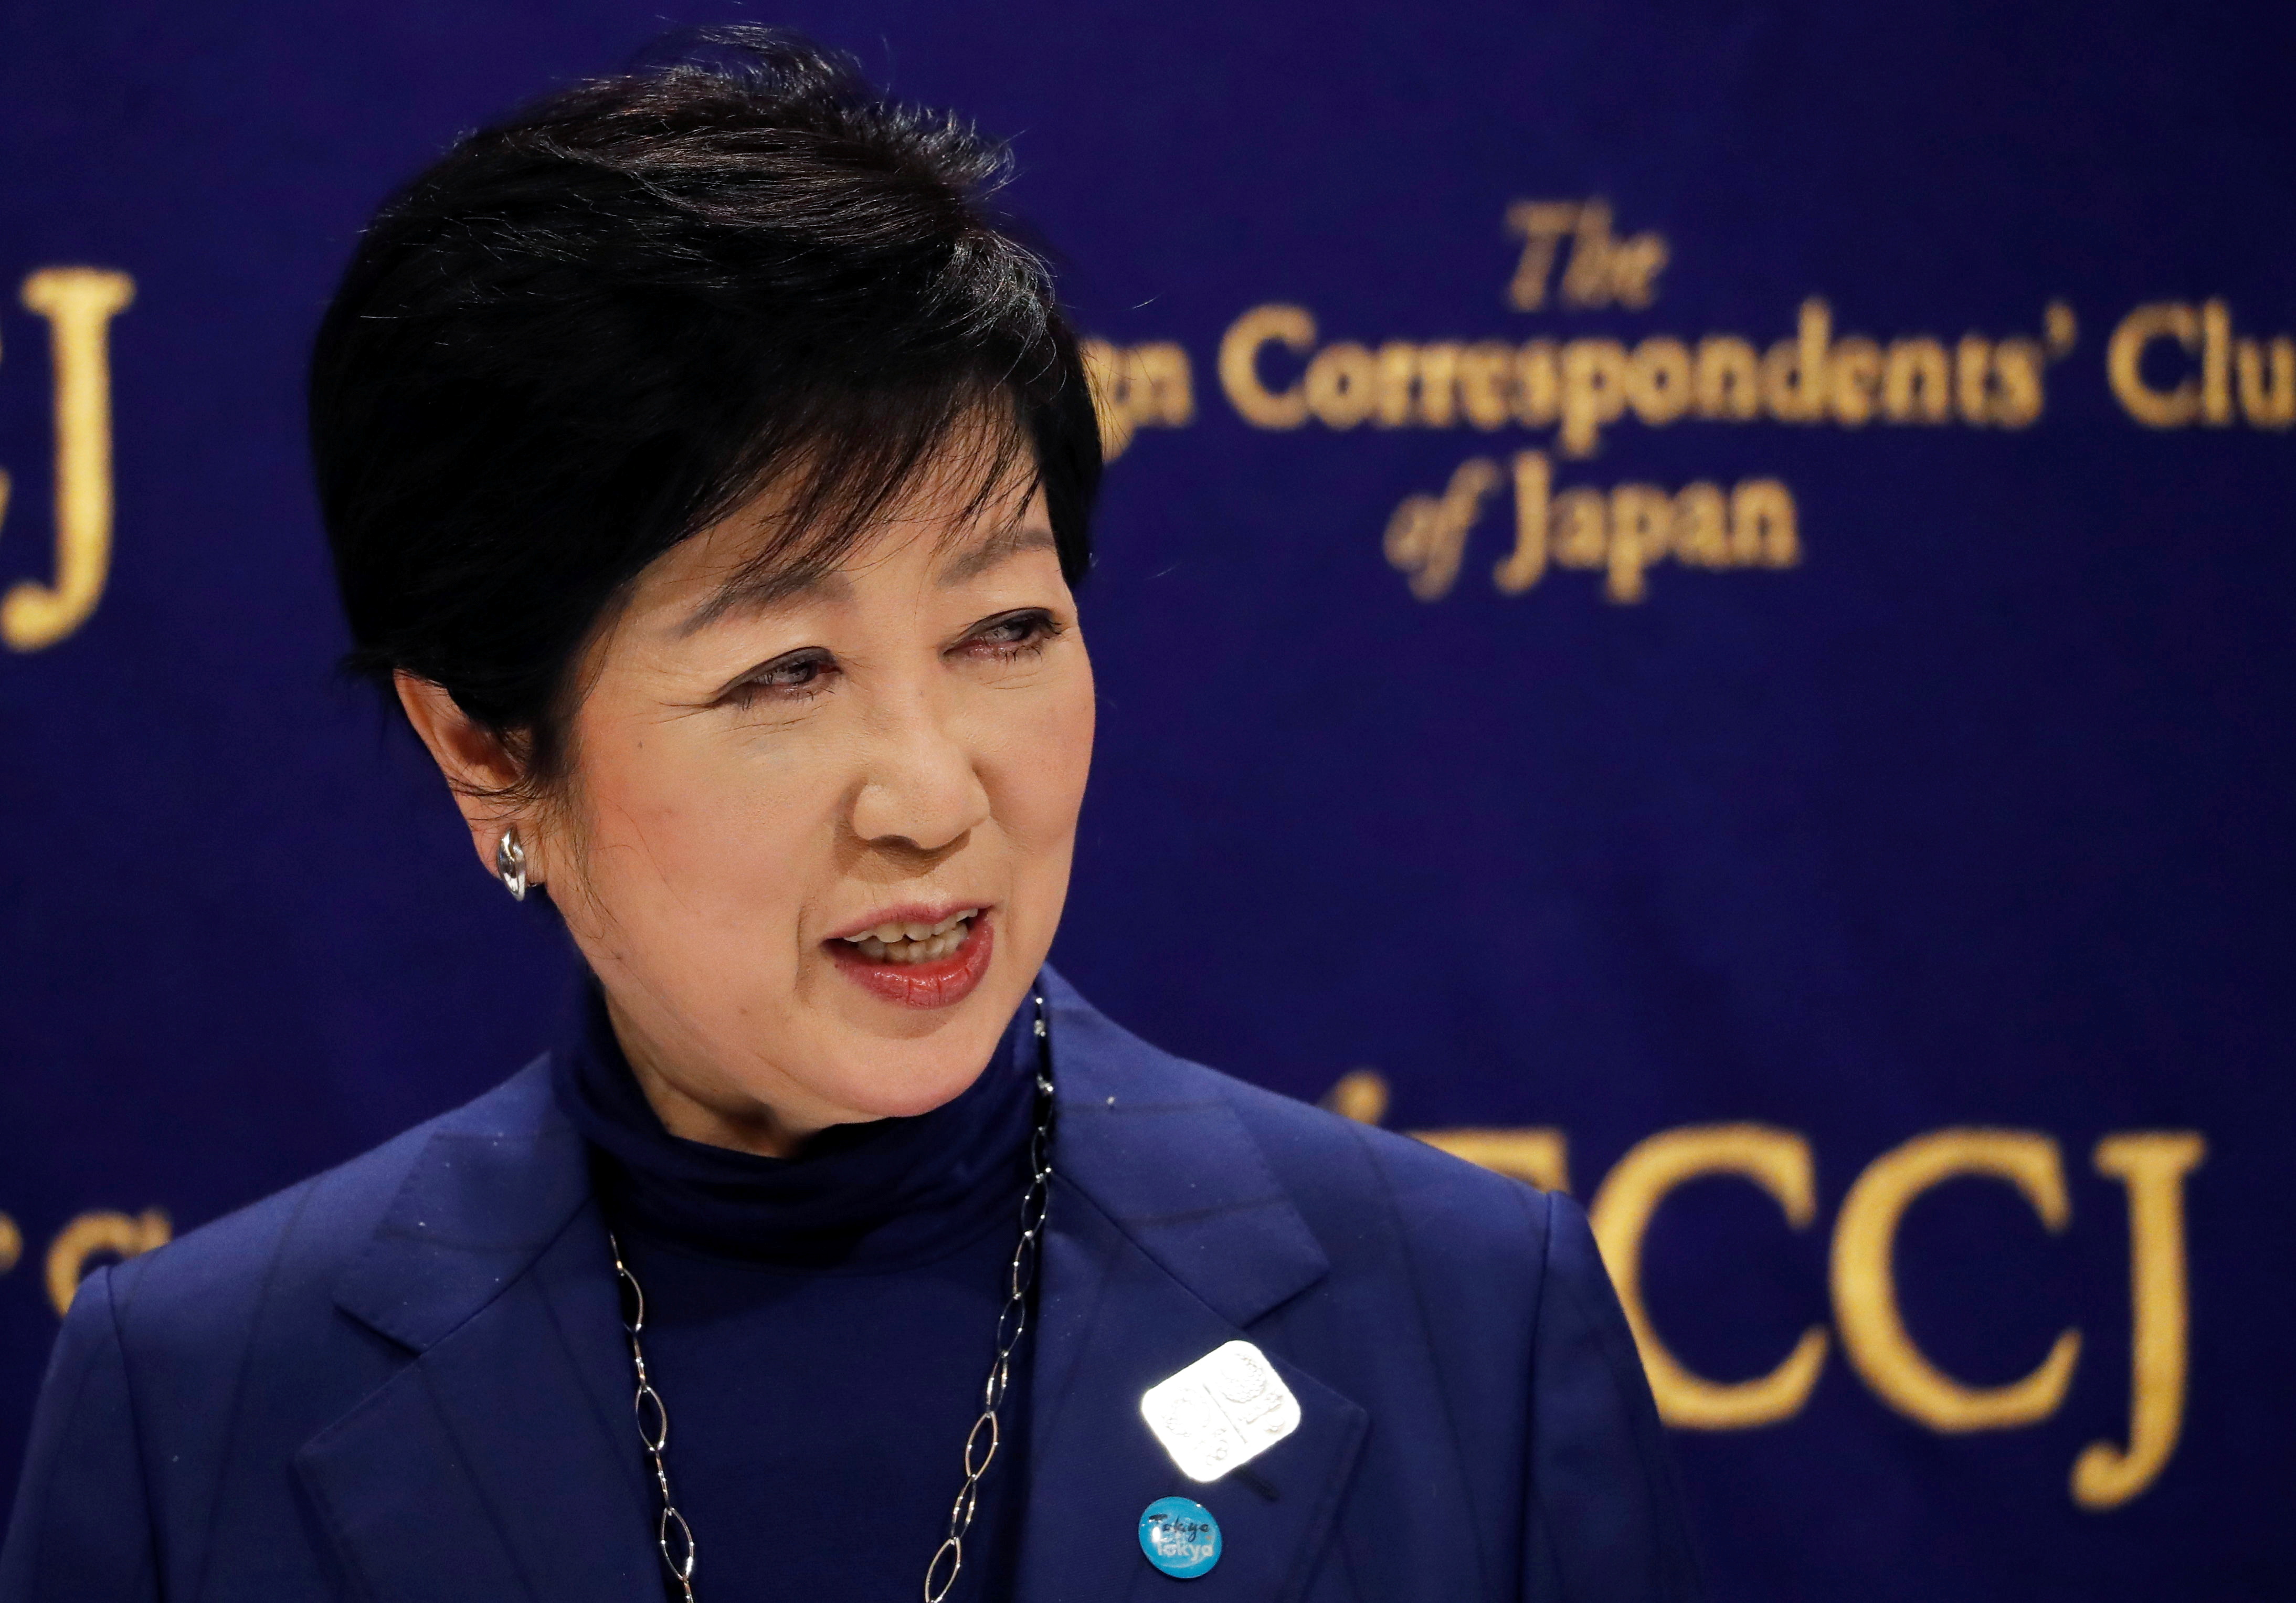 Tokyo Governor Yuriko Koike attends a news conference, amid the coronavirus disease (COVID-19) outbreak, at the Foreign Correspondents' Club of Japan, in Tokyo, Japan, November 24, 2020. REUTERS/Issei Kato